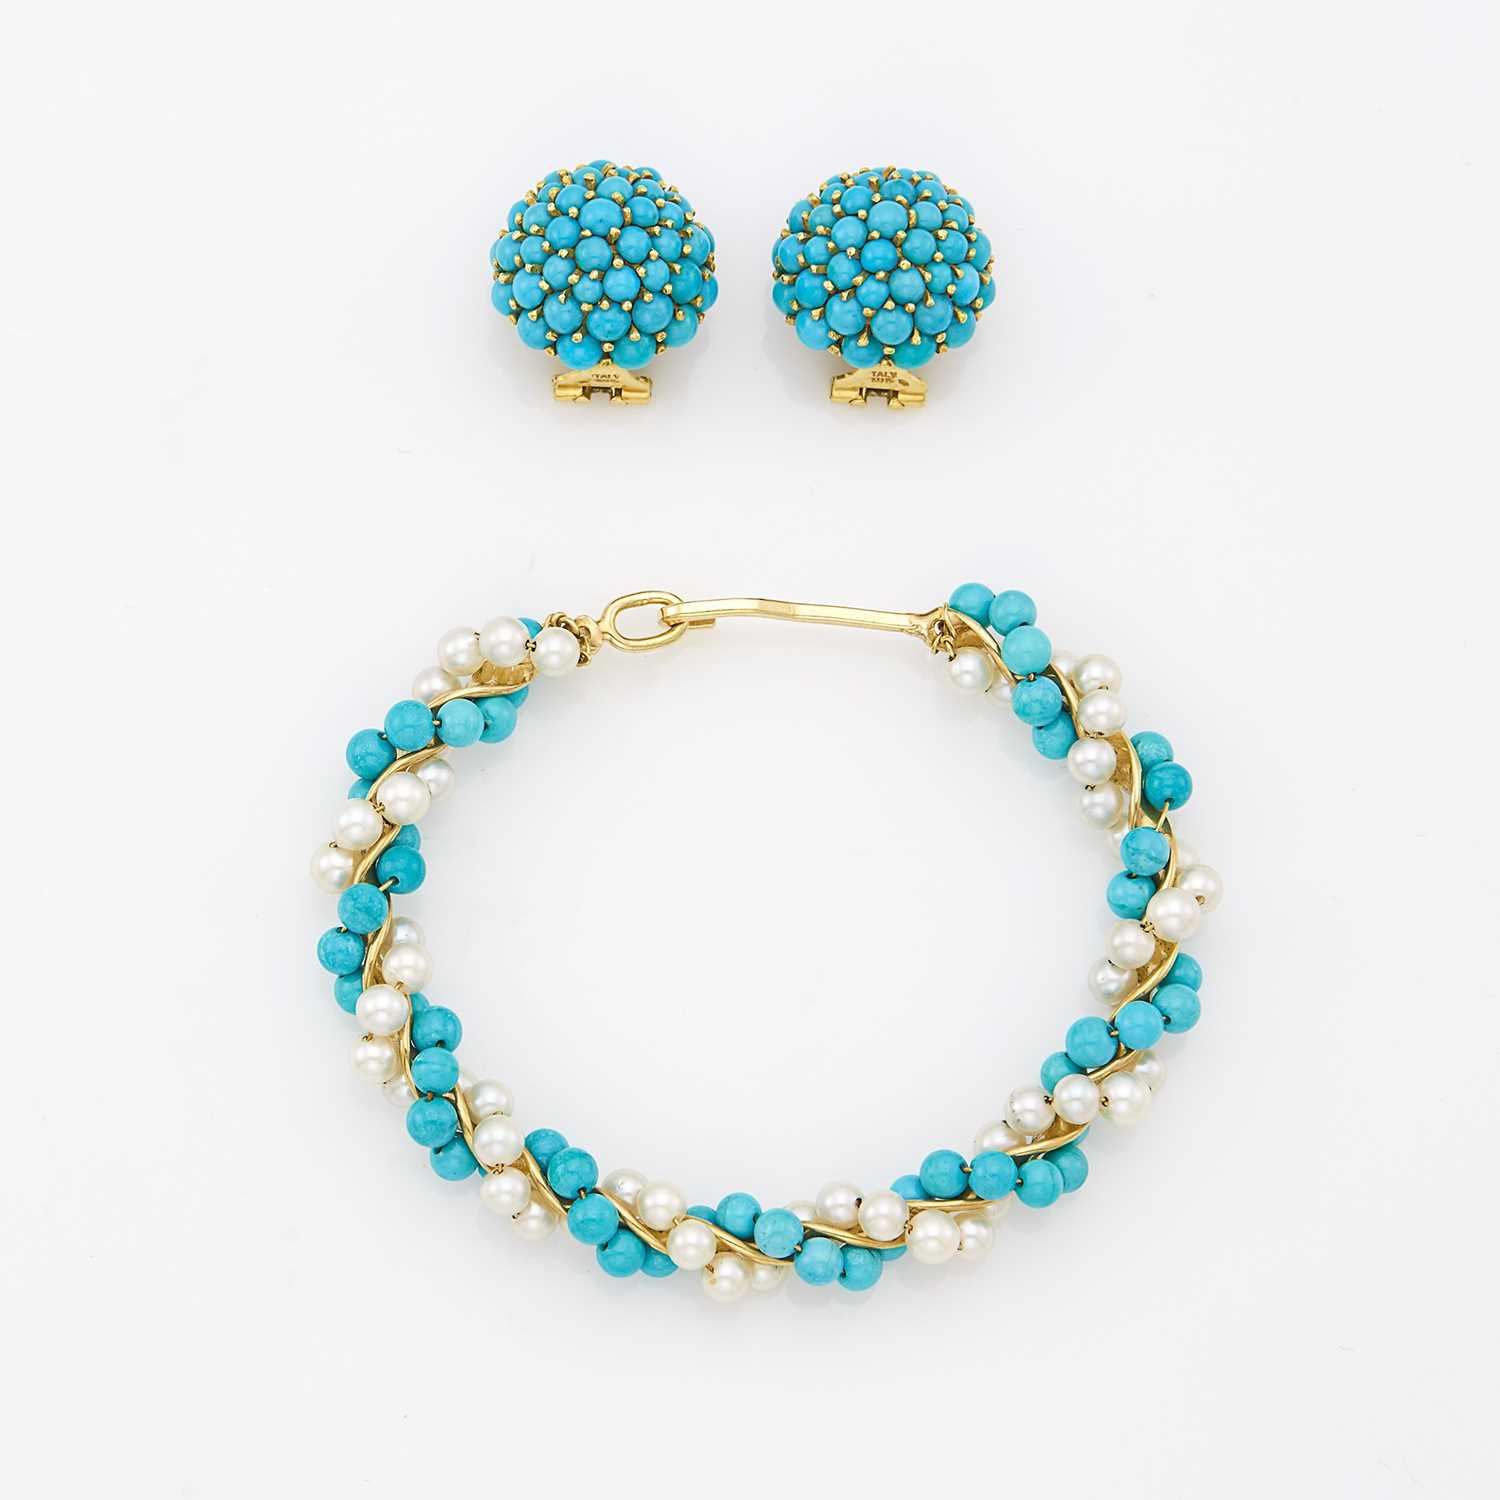 Lot 1022 - Pair of Gold and Turquoise Earclips and Gold, Turquoise Bead and Cultured Pearl Bangle Bracelet